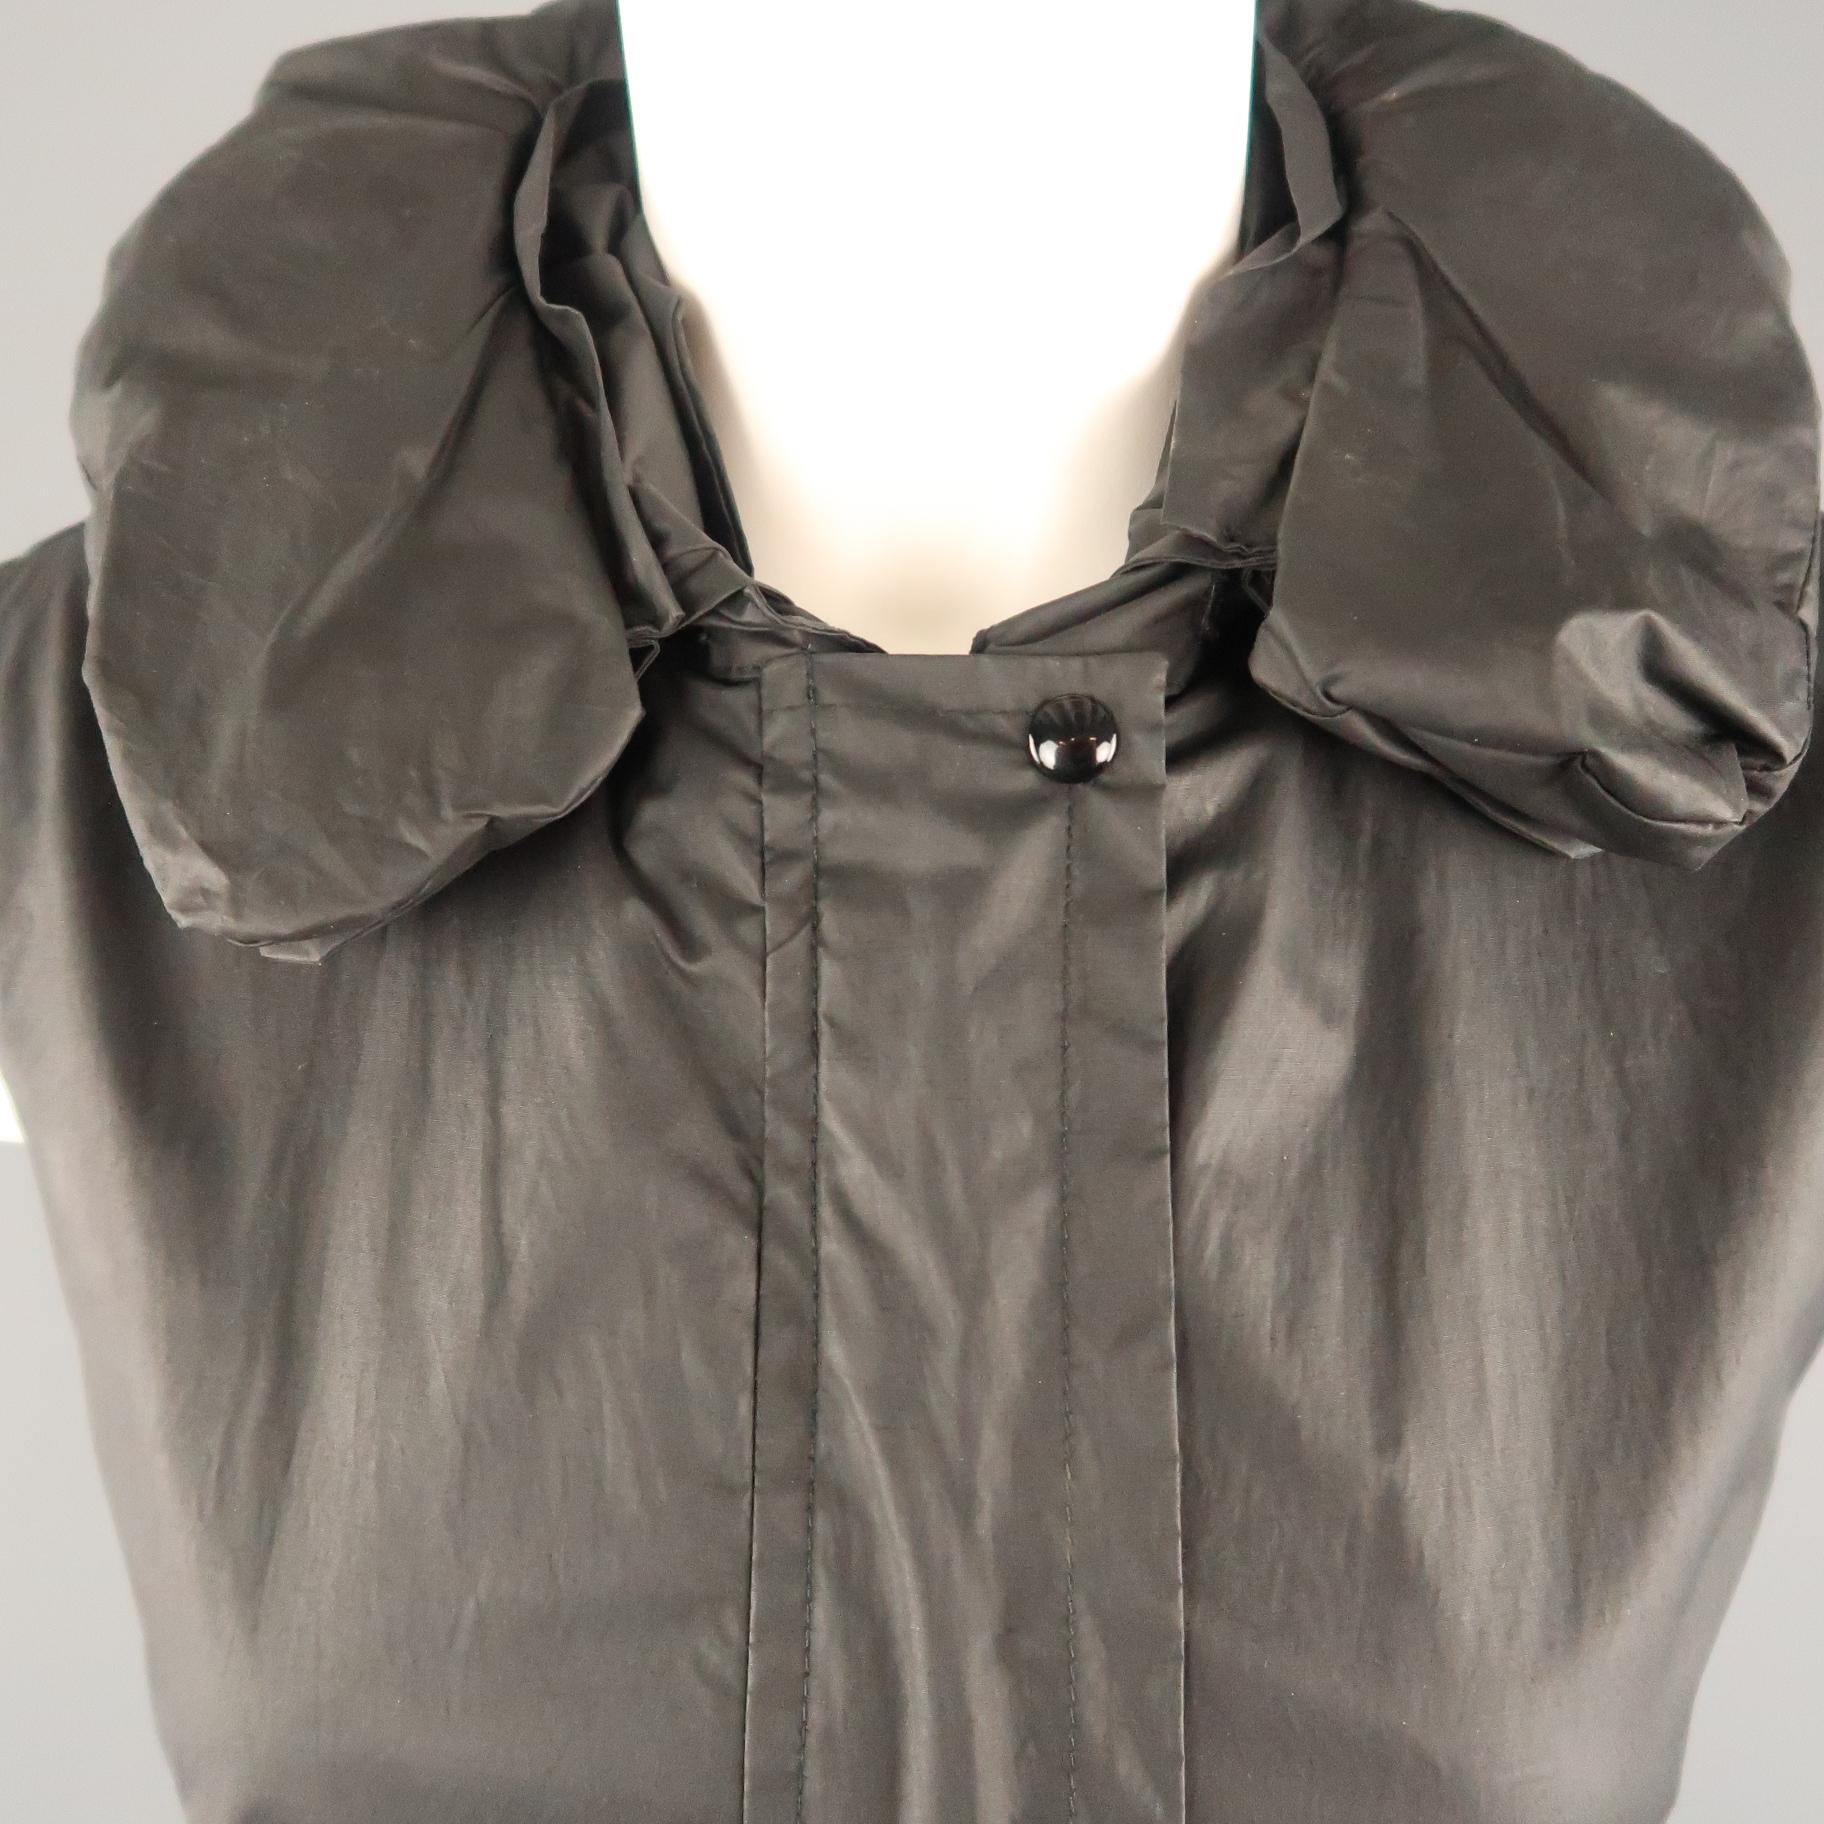 Archive 1999-2000 HELMUT LANG Astro parachute vest comes in coated fabric with with a hidden placket zip up front, side zip pockets, zip waistband, detachable zip out hoodie neck pillow collar, and iconic bondage strap interior. Very minor wear.